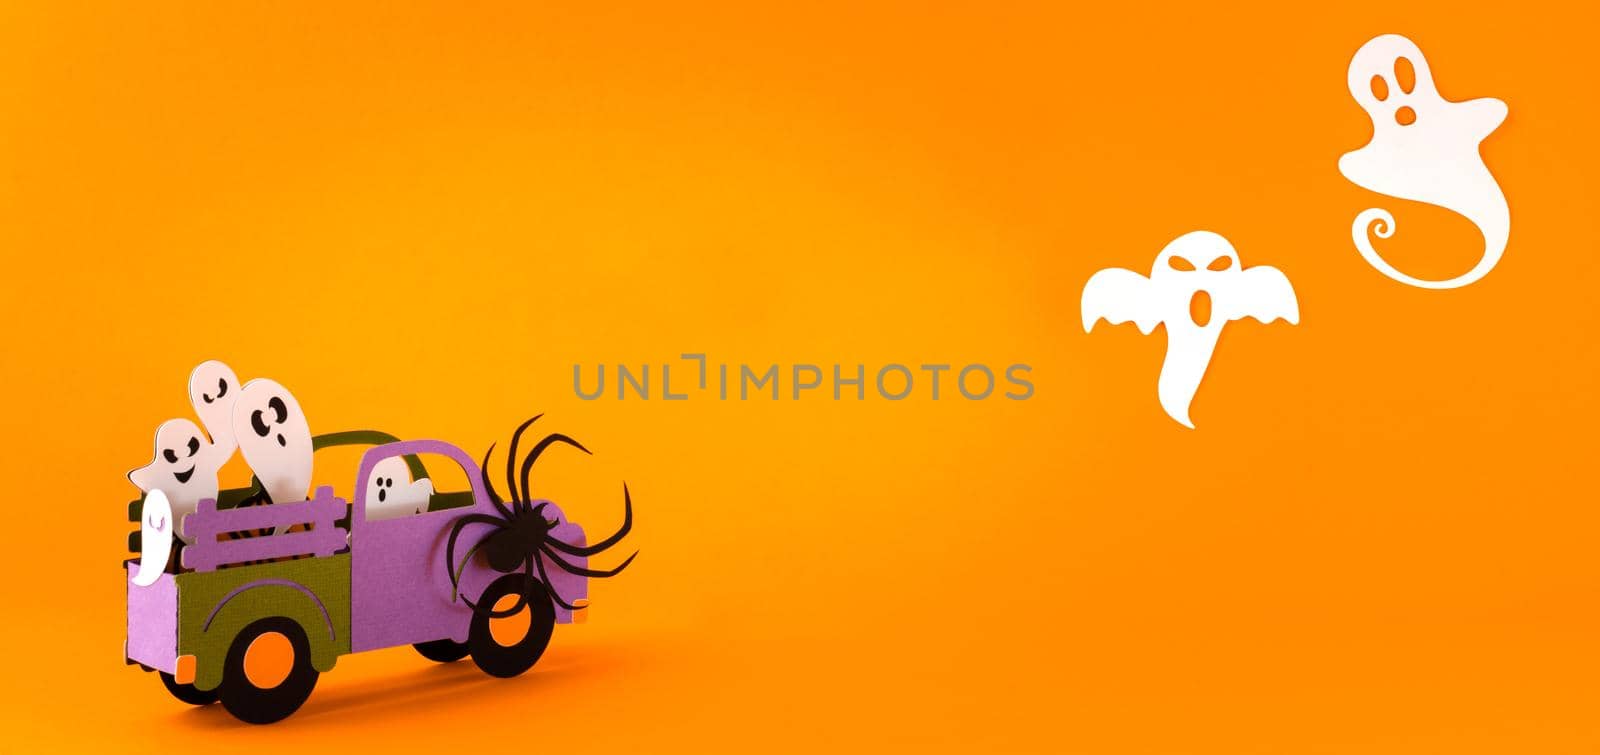 Happy halloween holiday concept. Halloween handmade paper decorations, spiders, ghosts in car on orange background. Halloween festival party, greeting card mockup with copy space.